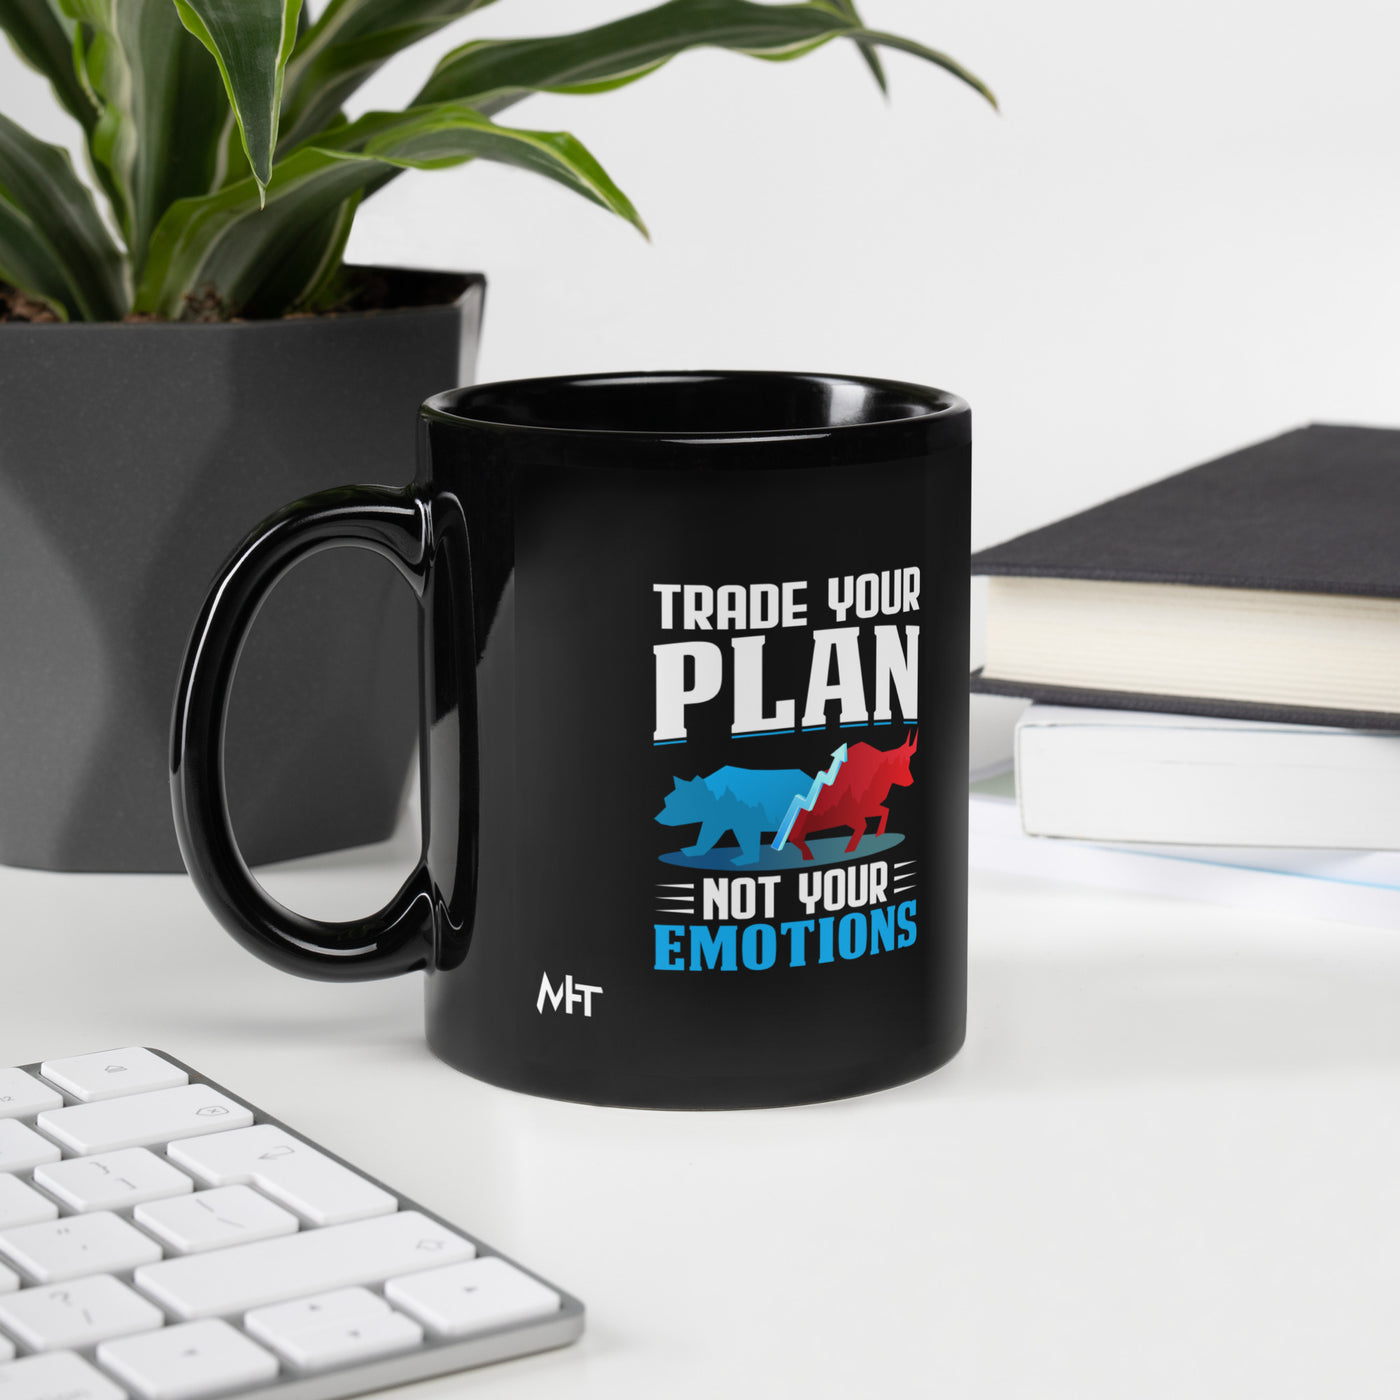 Trade your plan: not your emotion - Black Glossy Mug